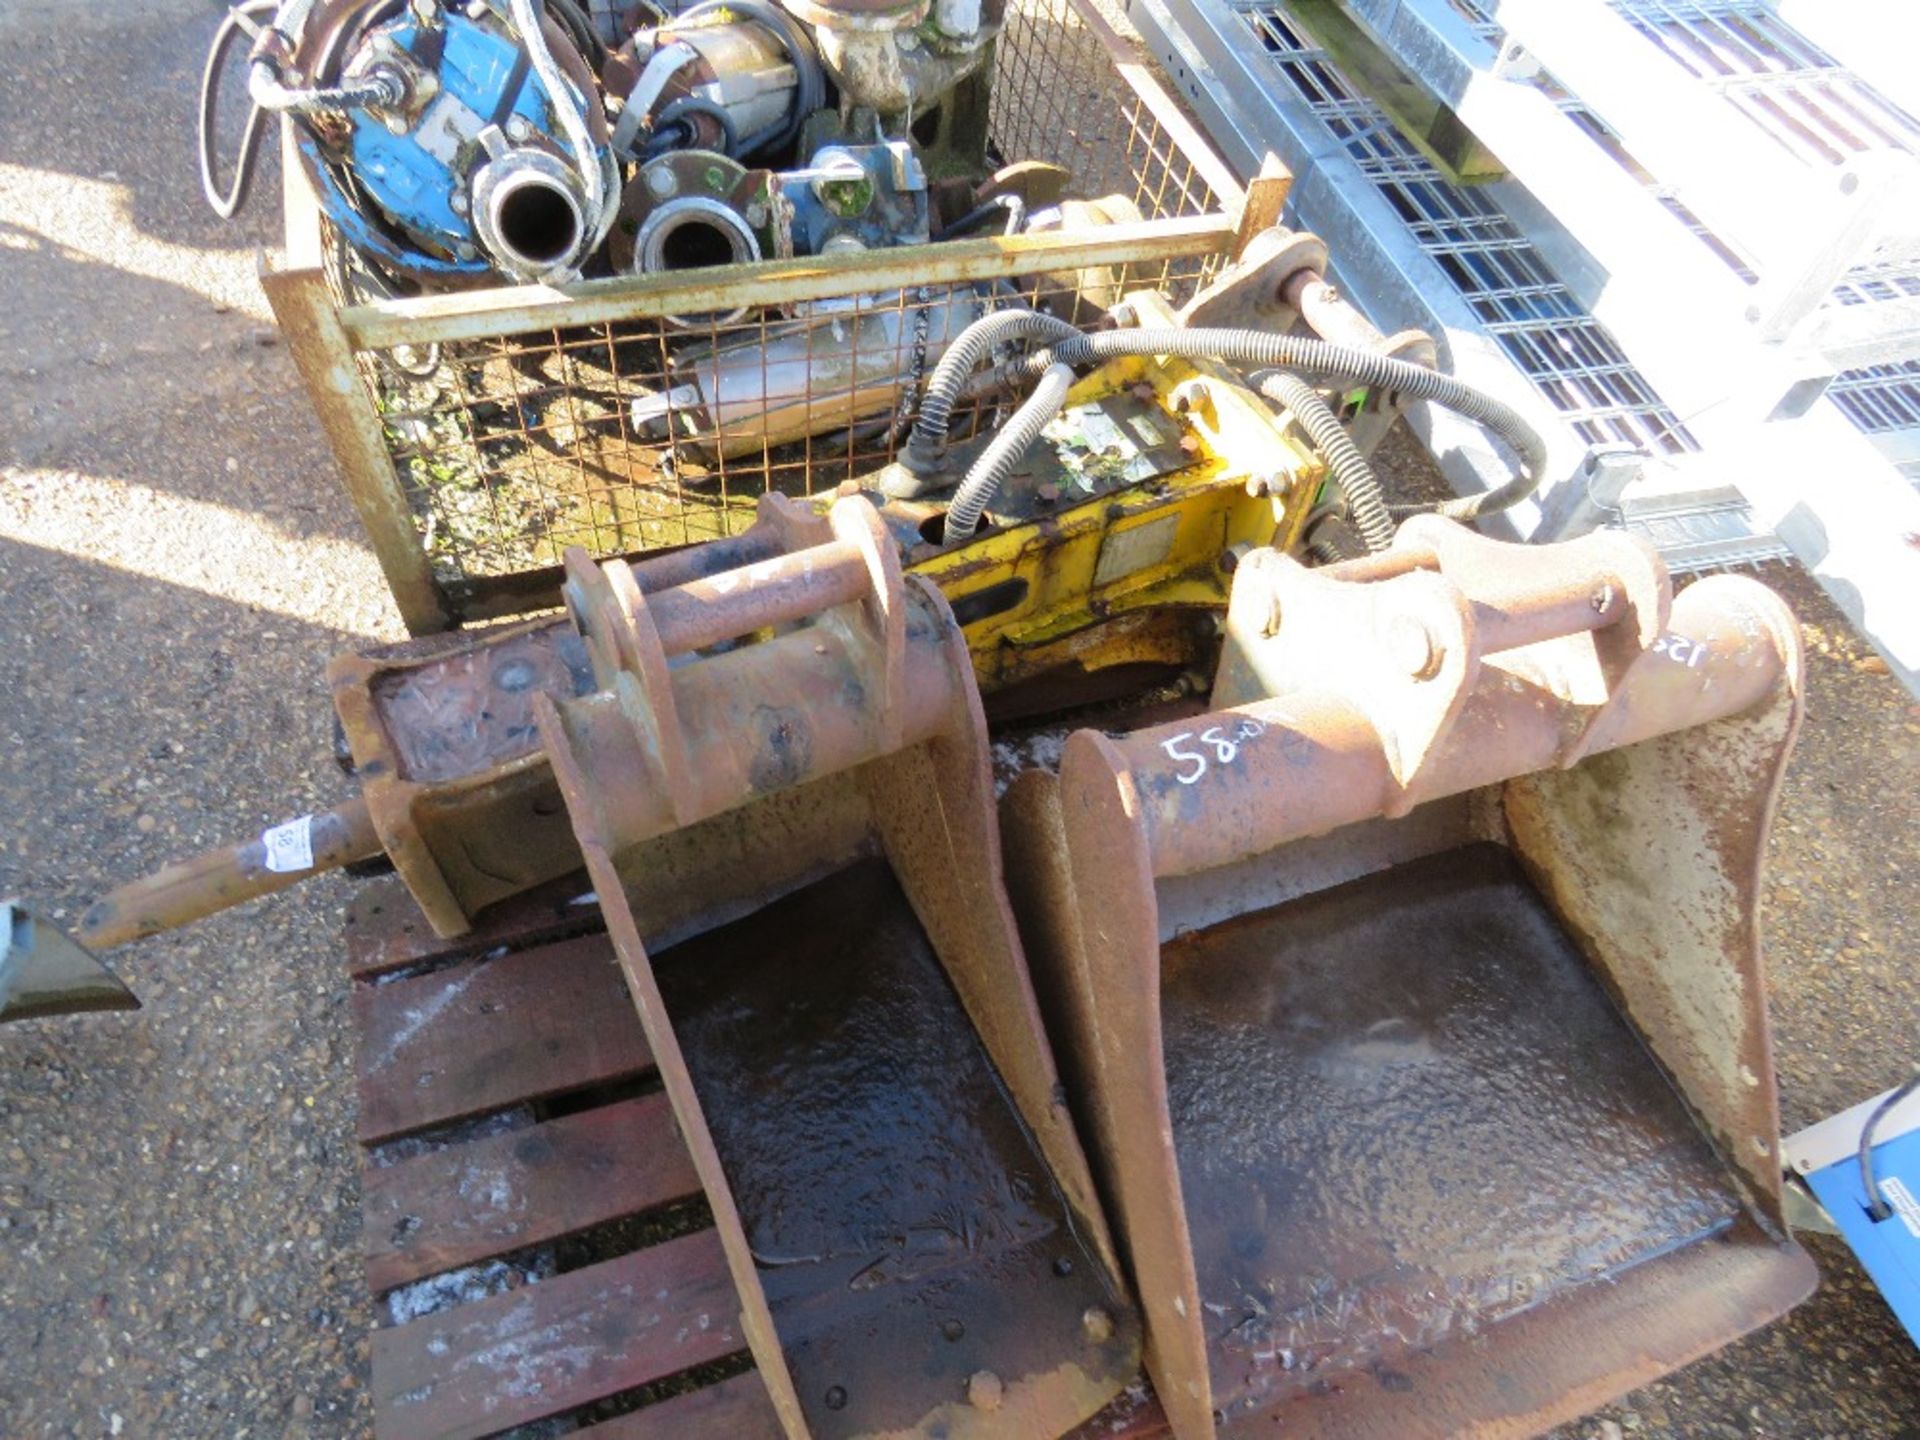 2 X BUCKETS AND OKTEC BREAKER TO SUIT EXCAVATOR ON 40MM PINS. DIRECT EX COMPANY DUE TO REORGANISATIO - Image 3 of 3